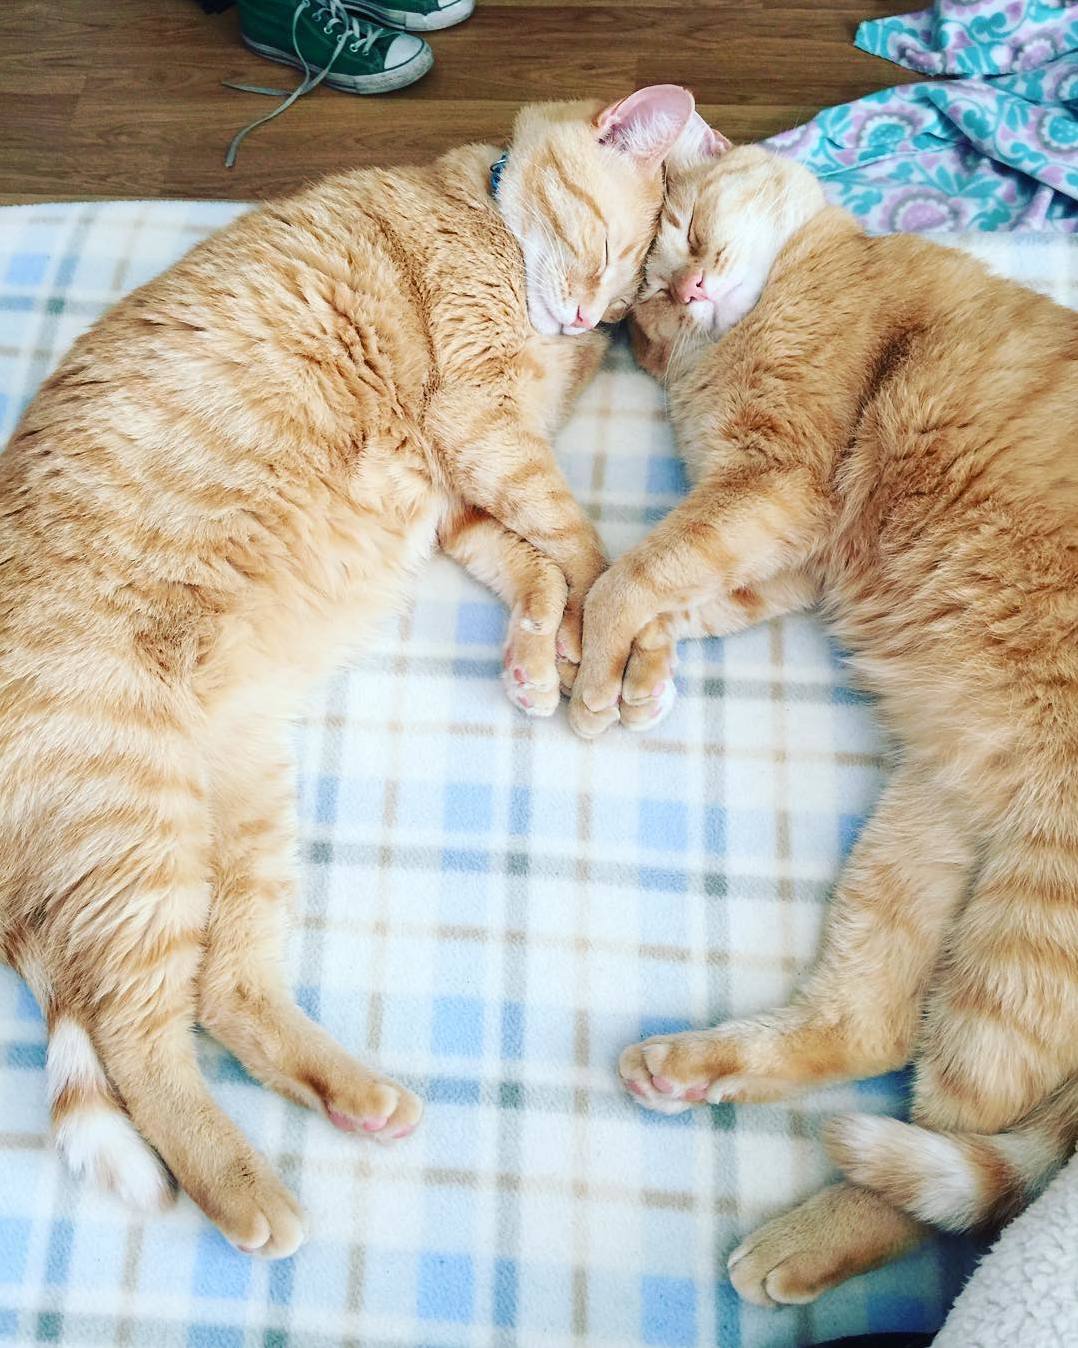 Sleeping brothers holding paws